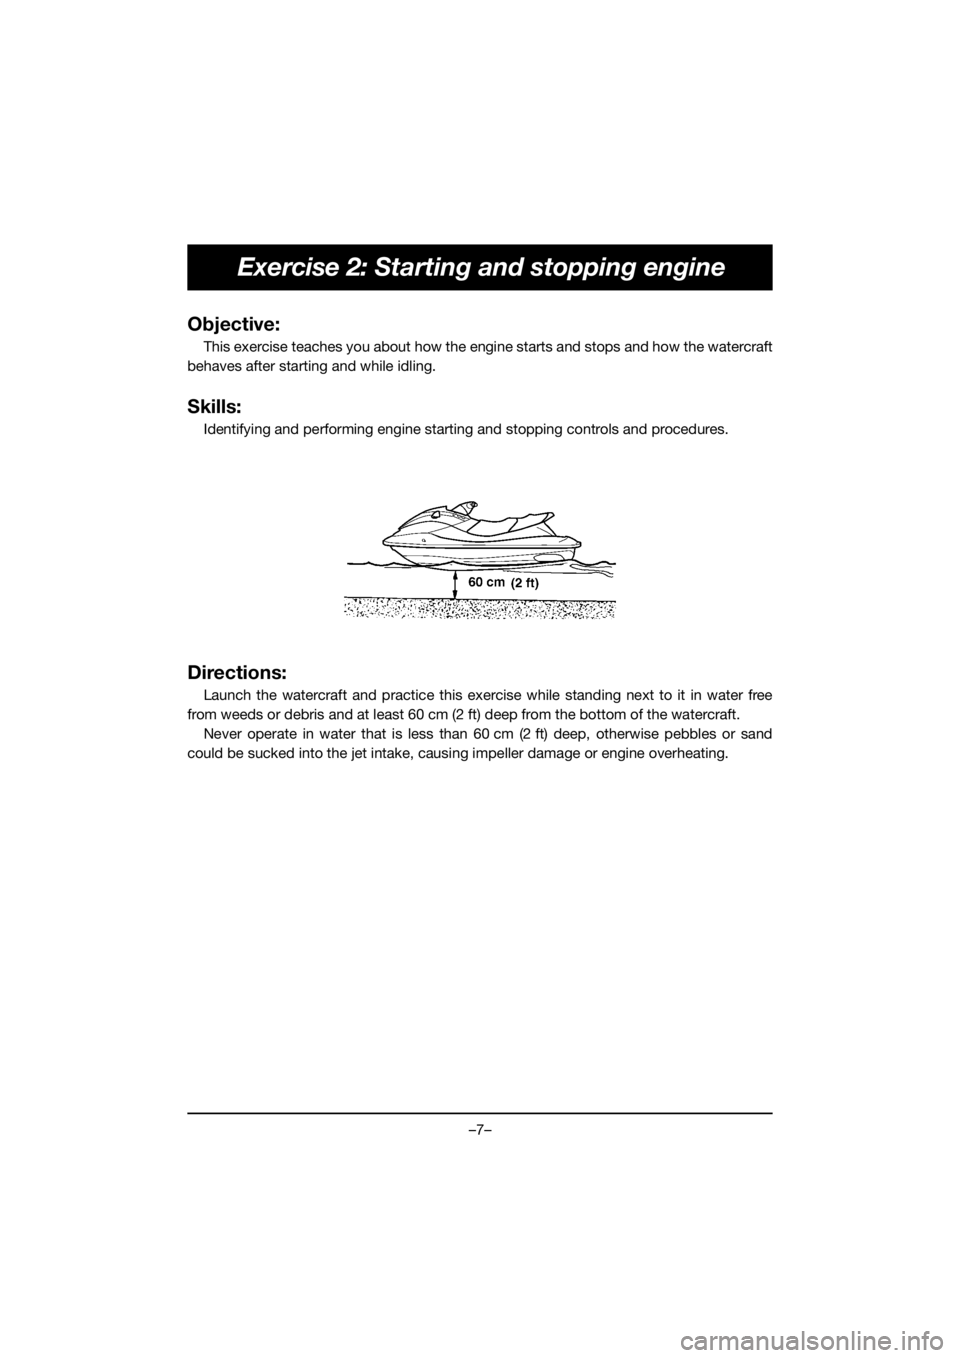 YAMAHA EX 2020  Manual de utilização (in Portuguese) –7–
Exercise 2: Starting and stopping engine
Objective:
This exercise teaches you about how the engine starts and stops and how the watercraft
behaves after starting and while idling.
Skills:
Iden